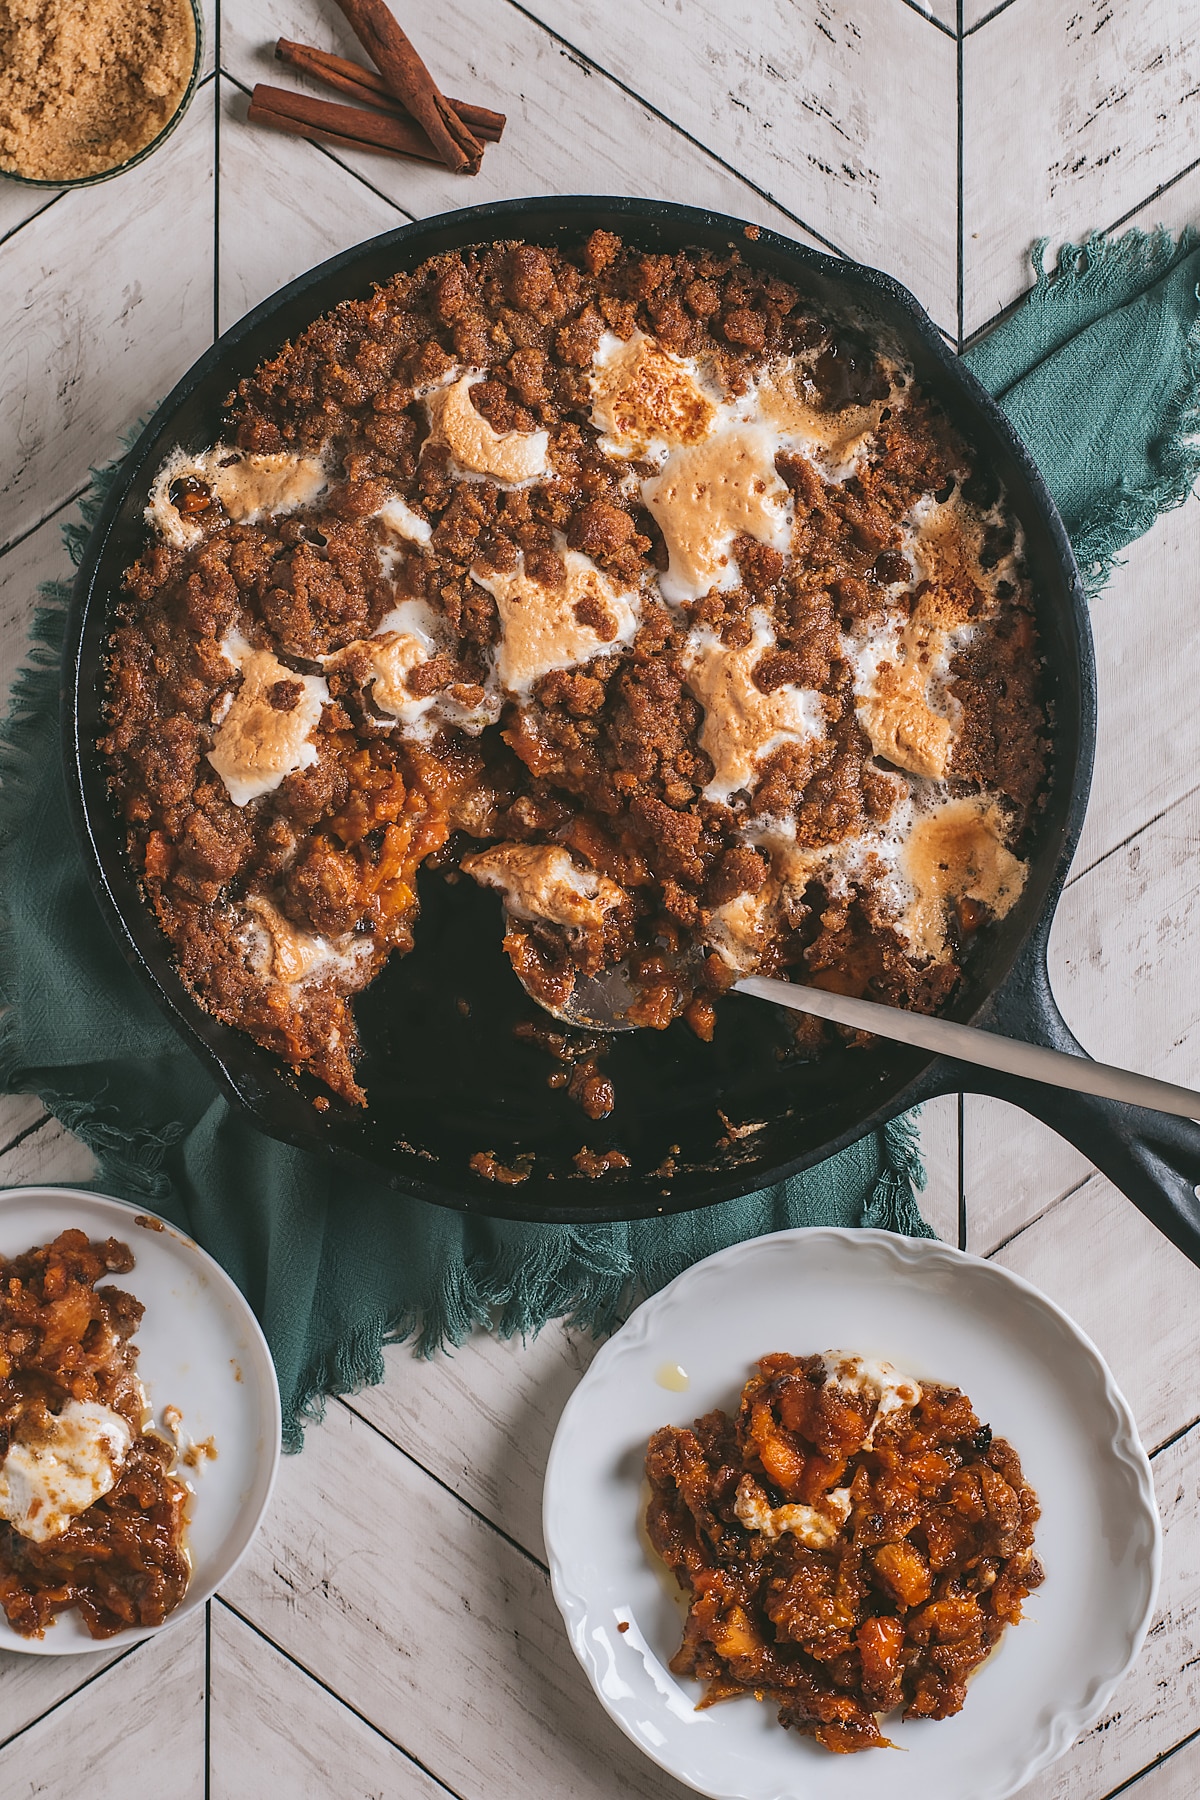 Roasted Sweet Potato Casserole with Gingersnap Streusel